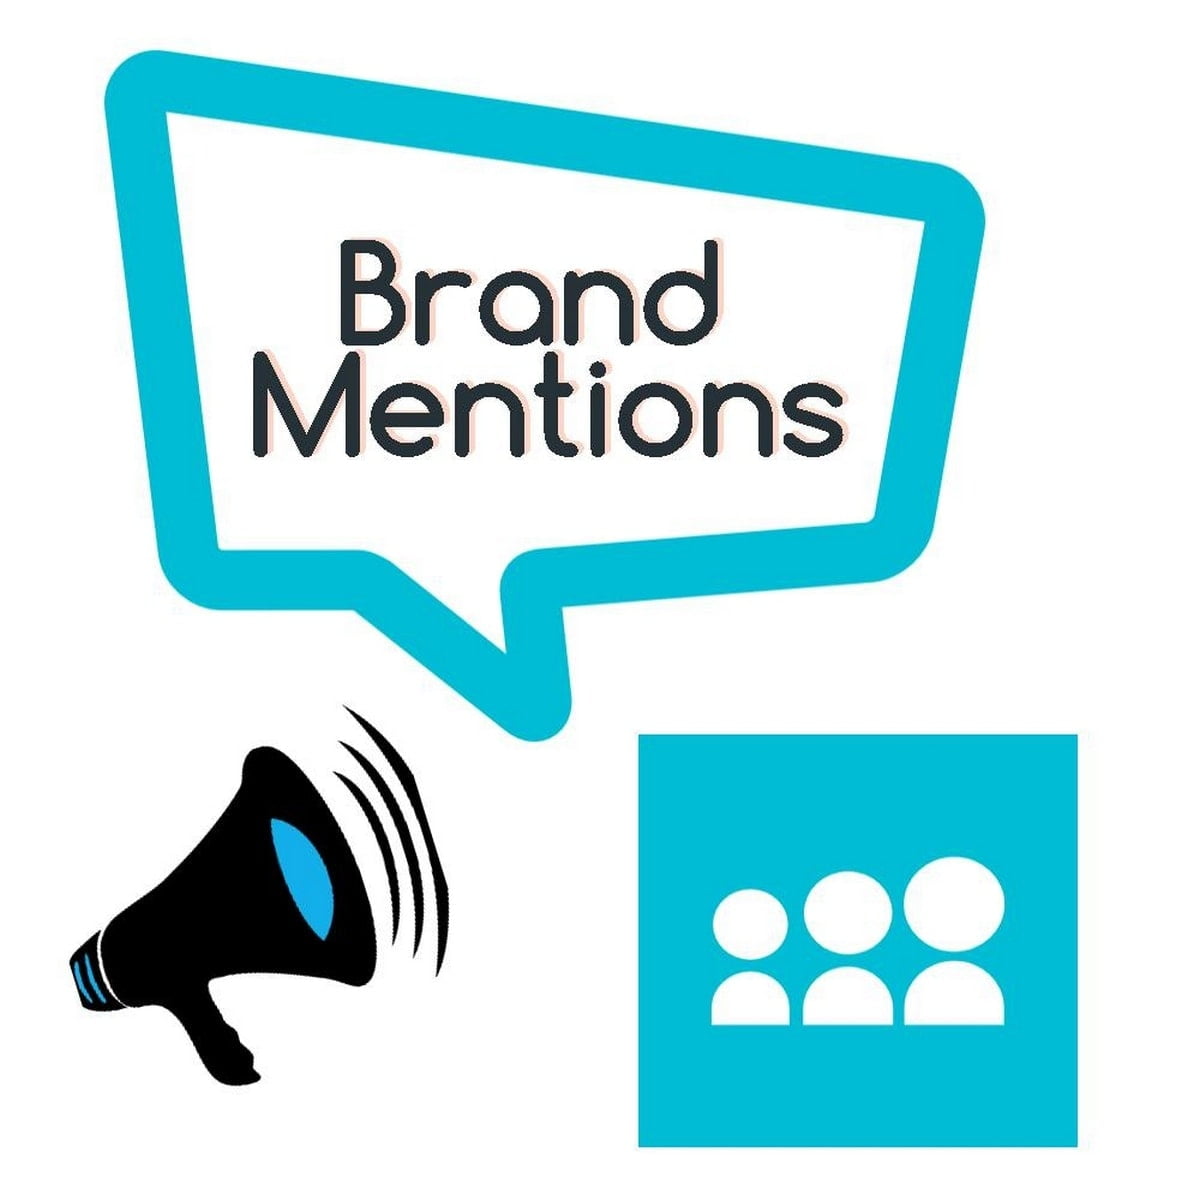 Social listening is a powerful tool for tracking brand mentions.